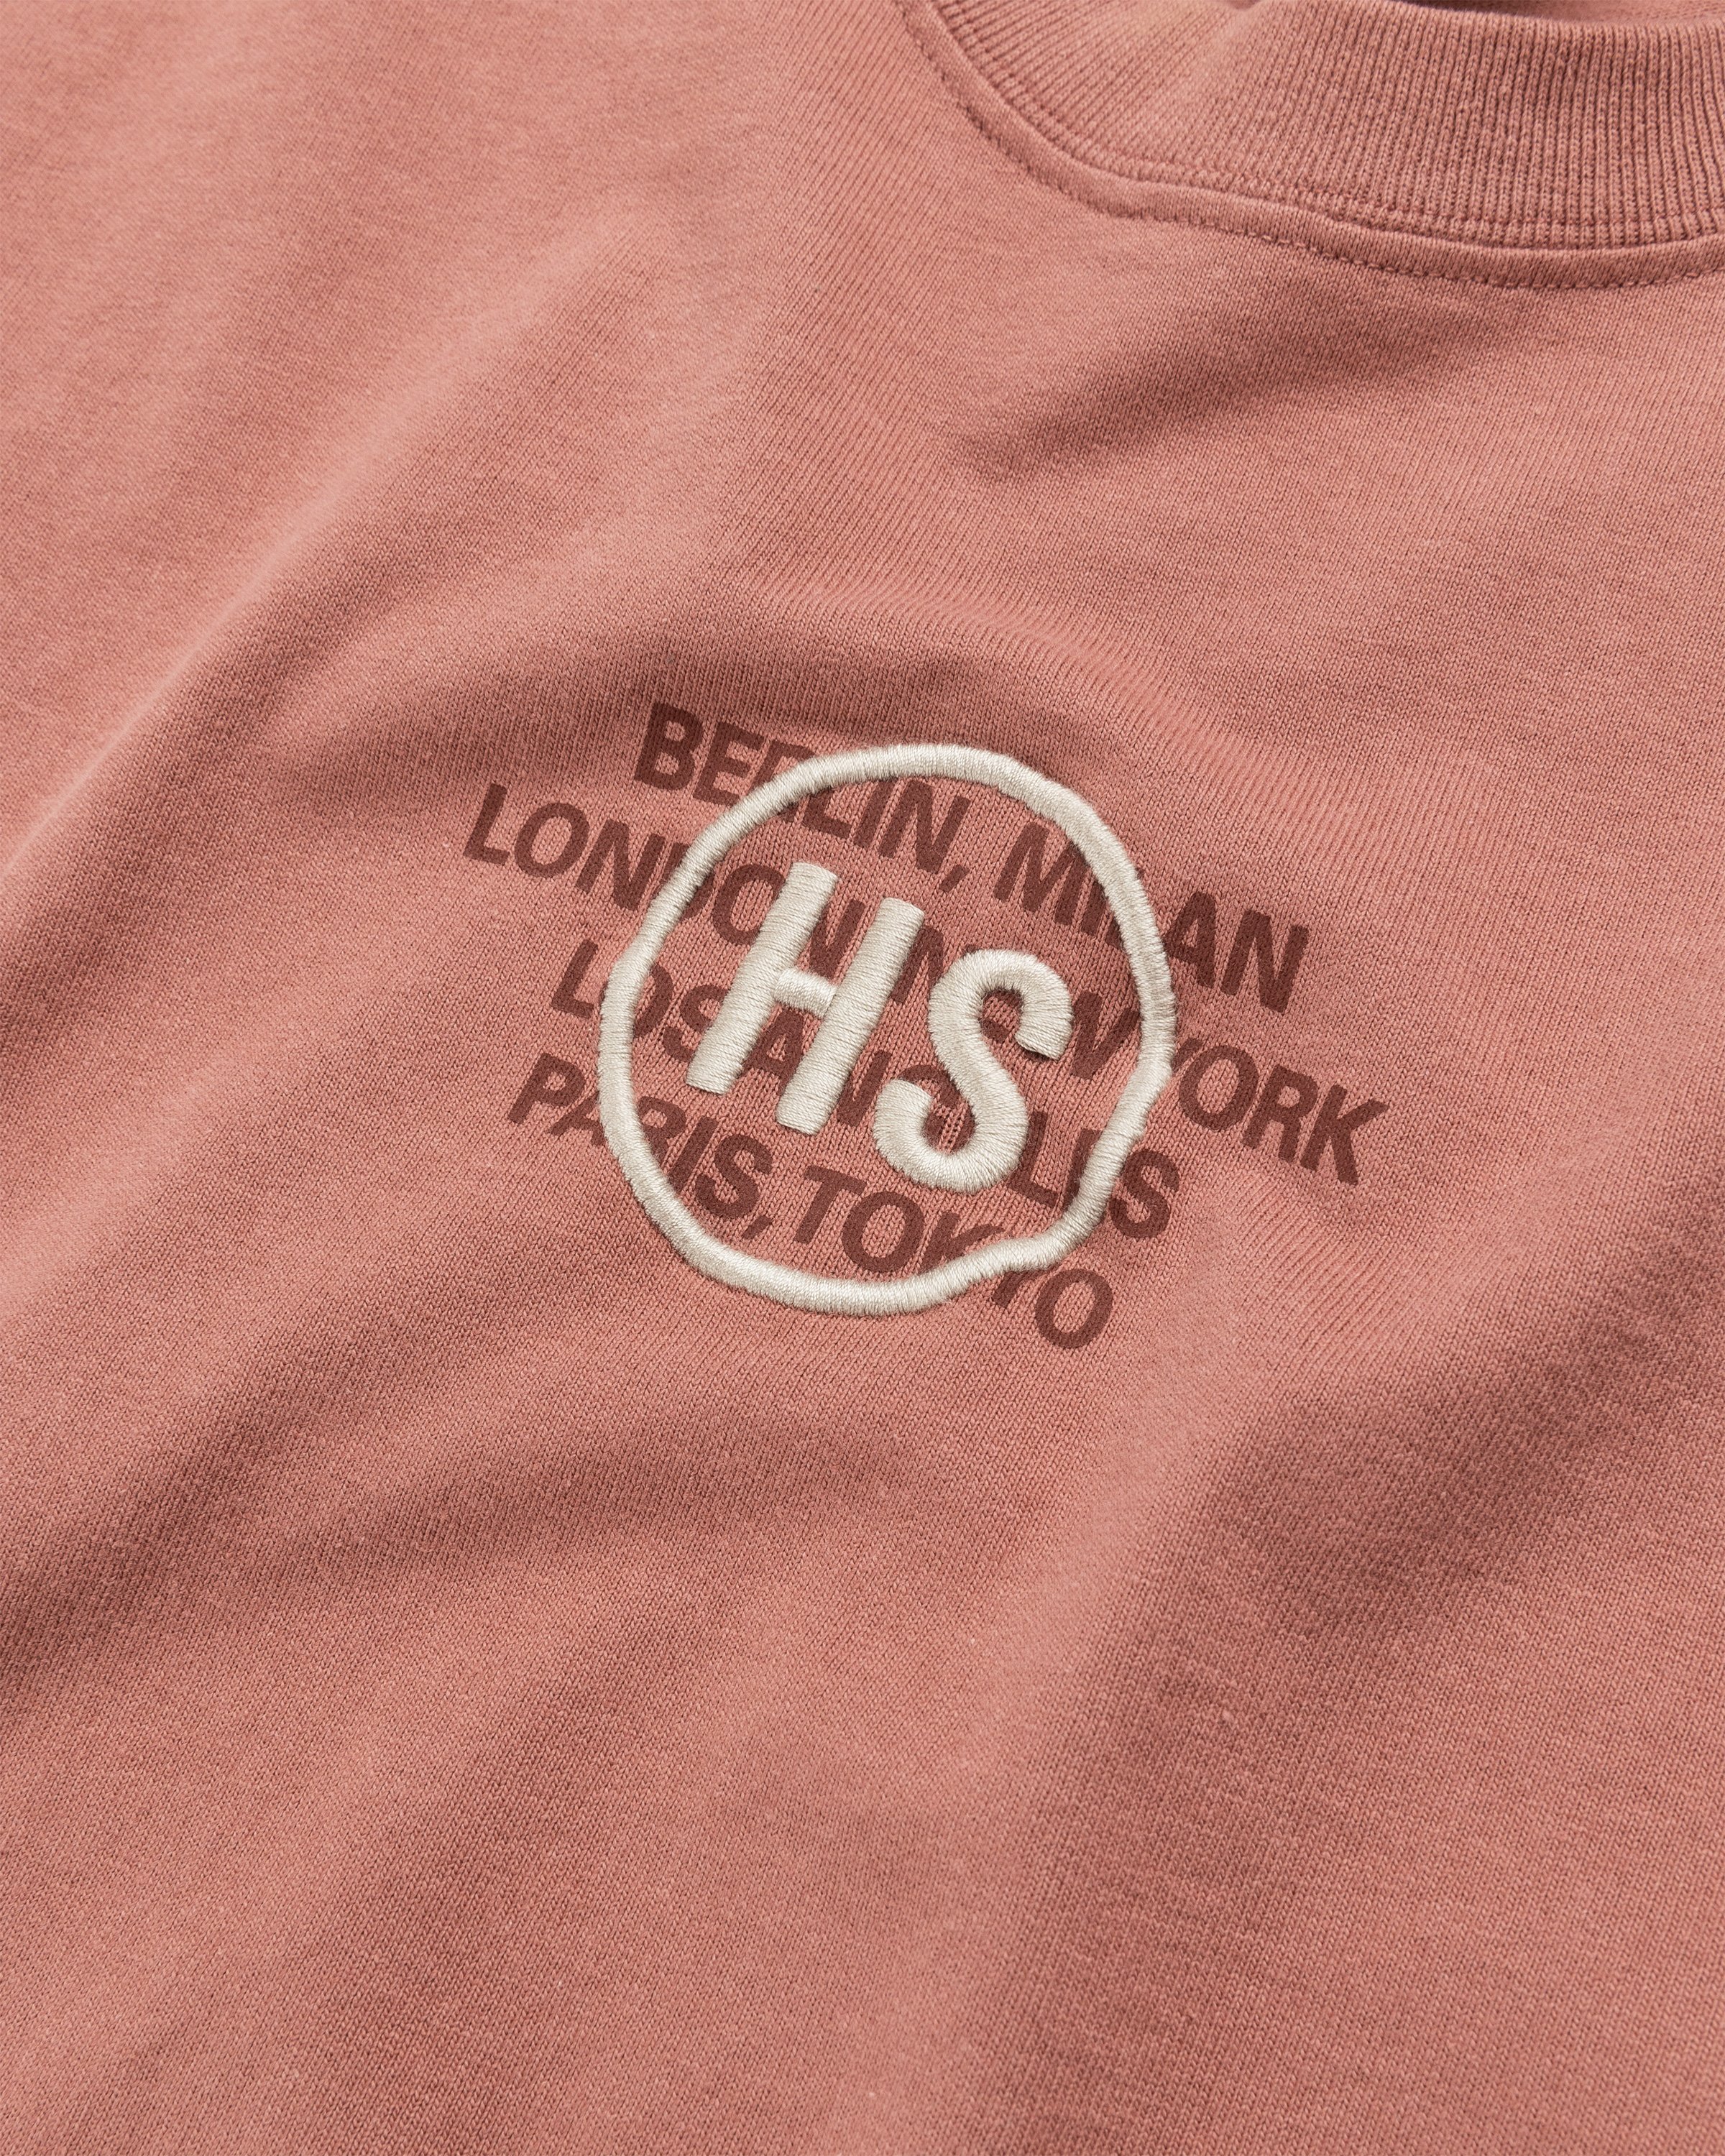 Highsnobiety - Upcycled Pale Pink Jersey - Clothing - Pink - Image 3